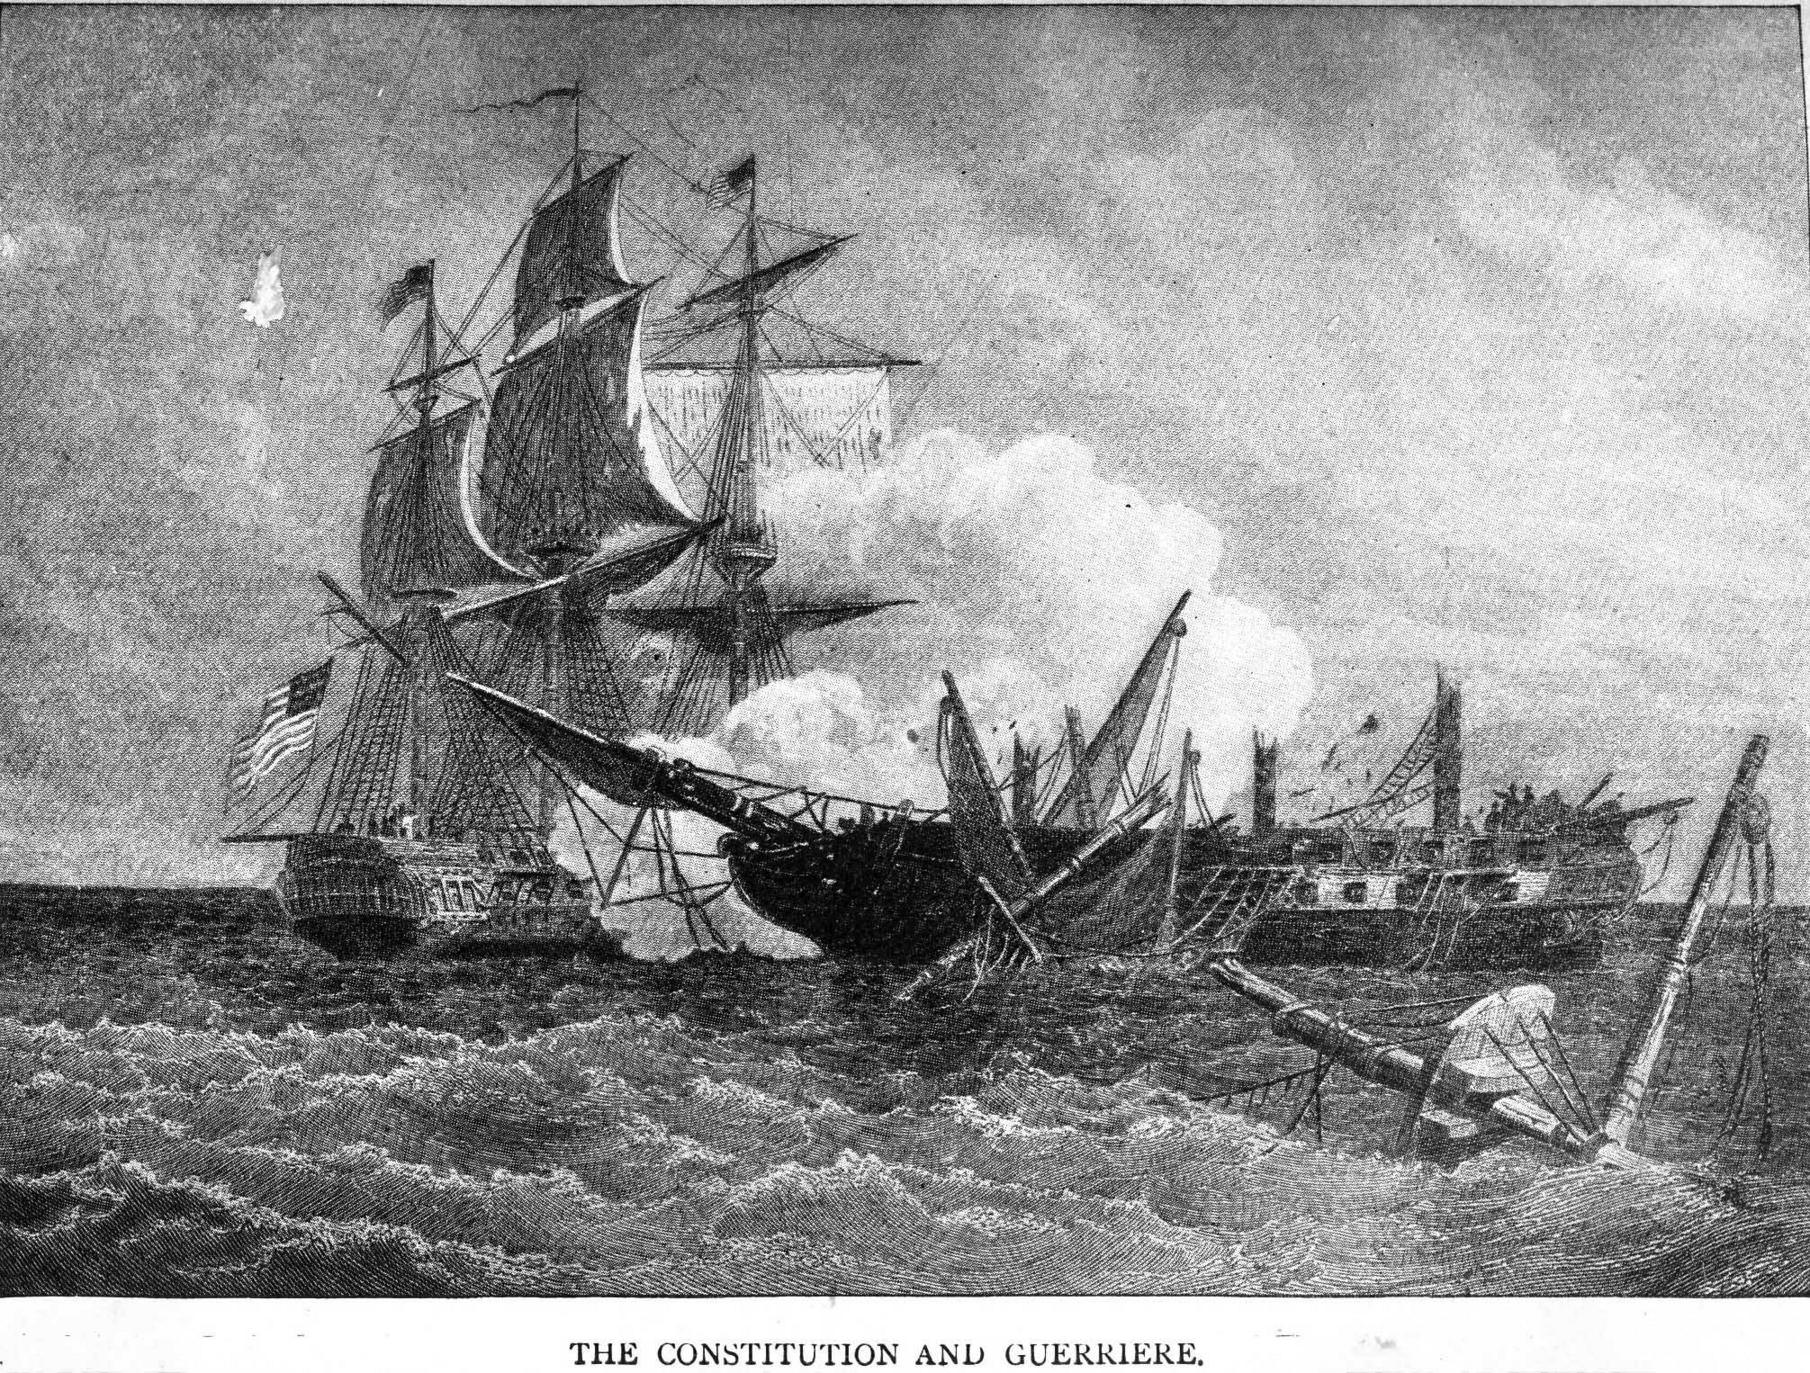 HMS Guerriere' Ship that fought USS Constitution Looking for Plans